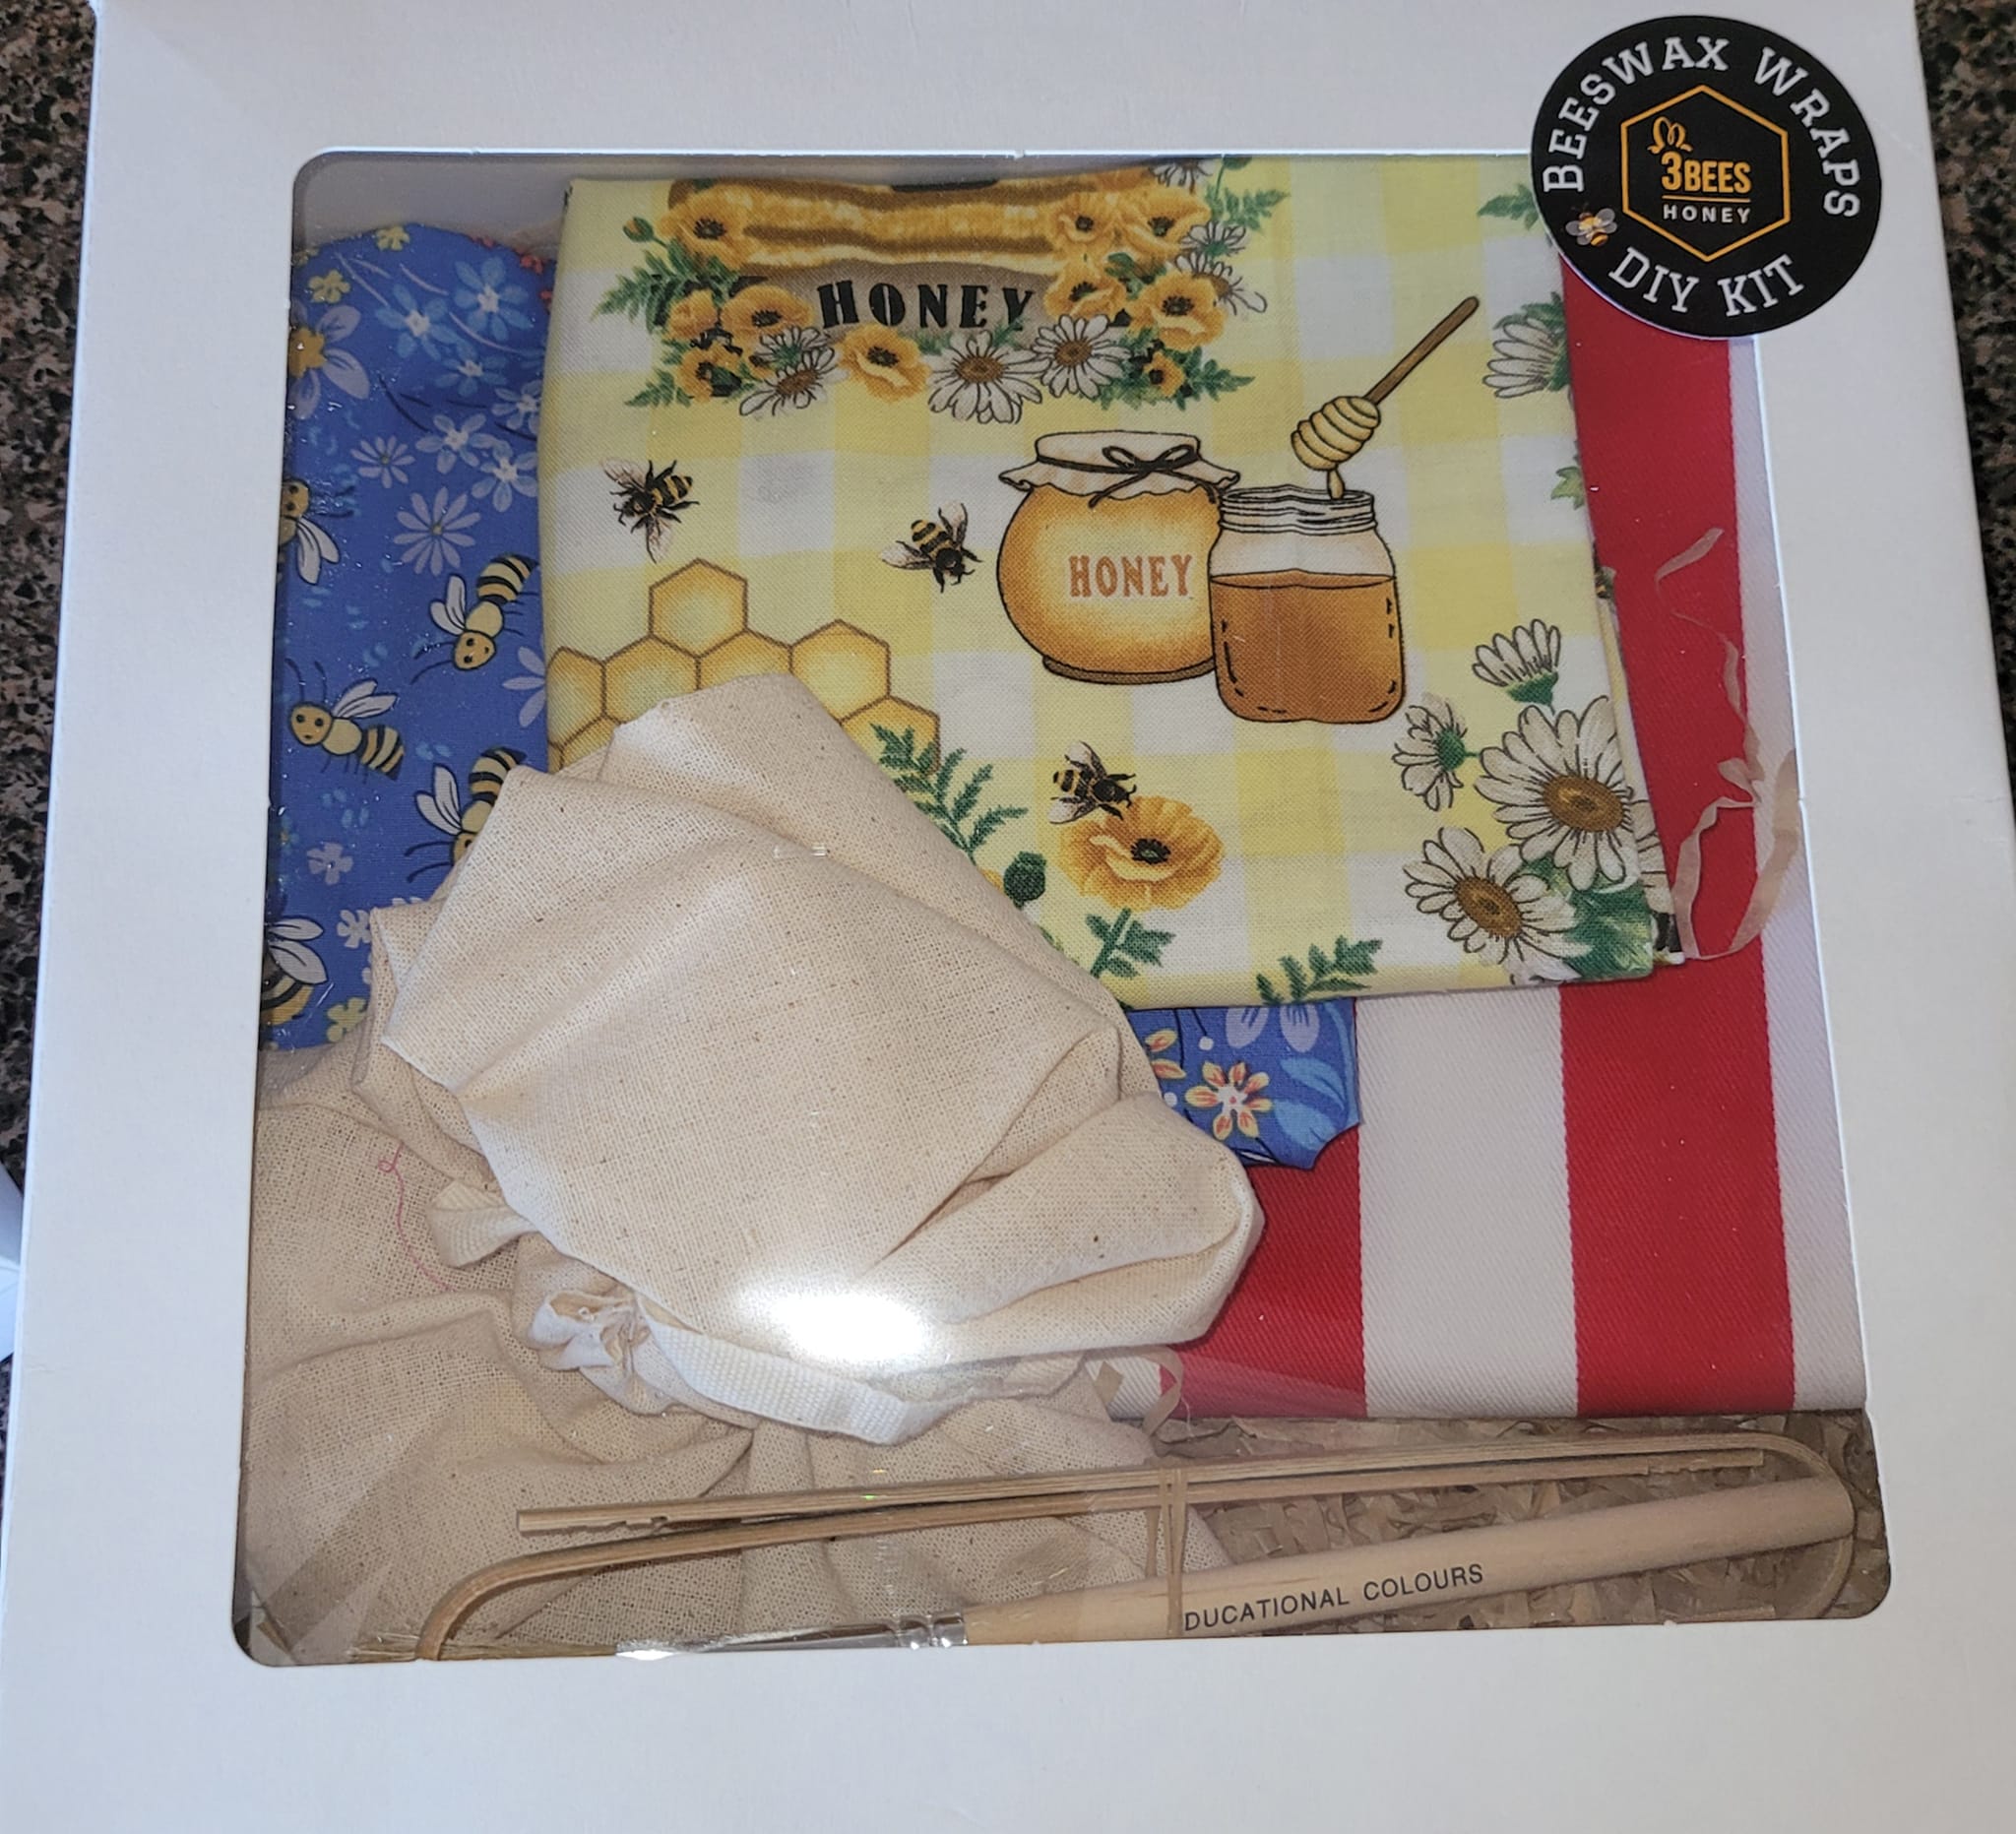 3Bees Honey Beeswax Wraps DIY Pack